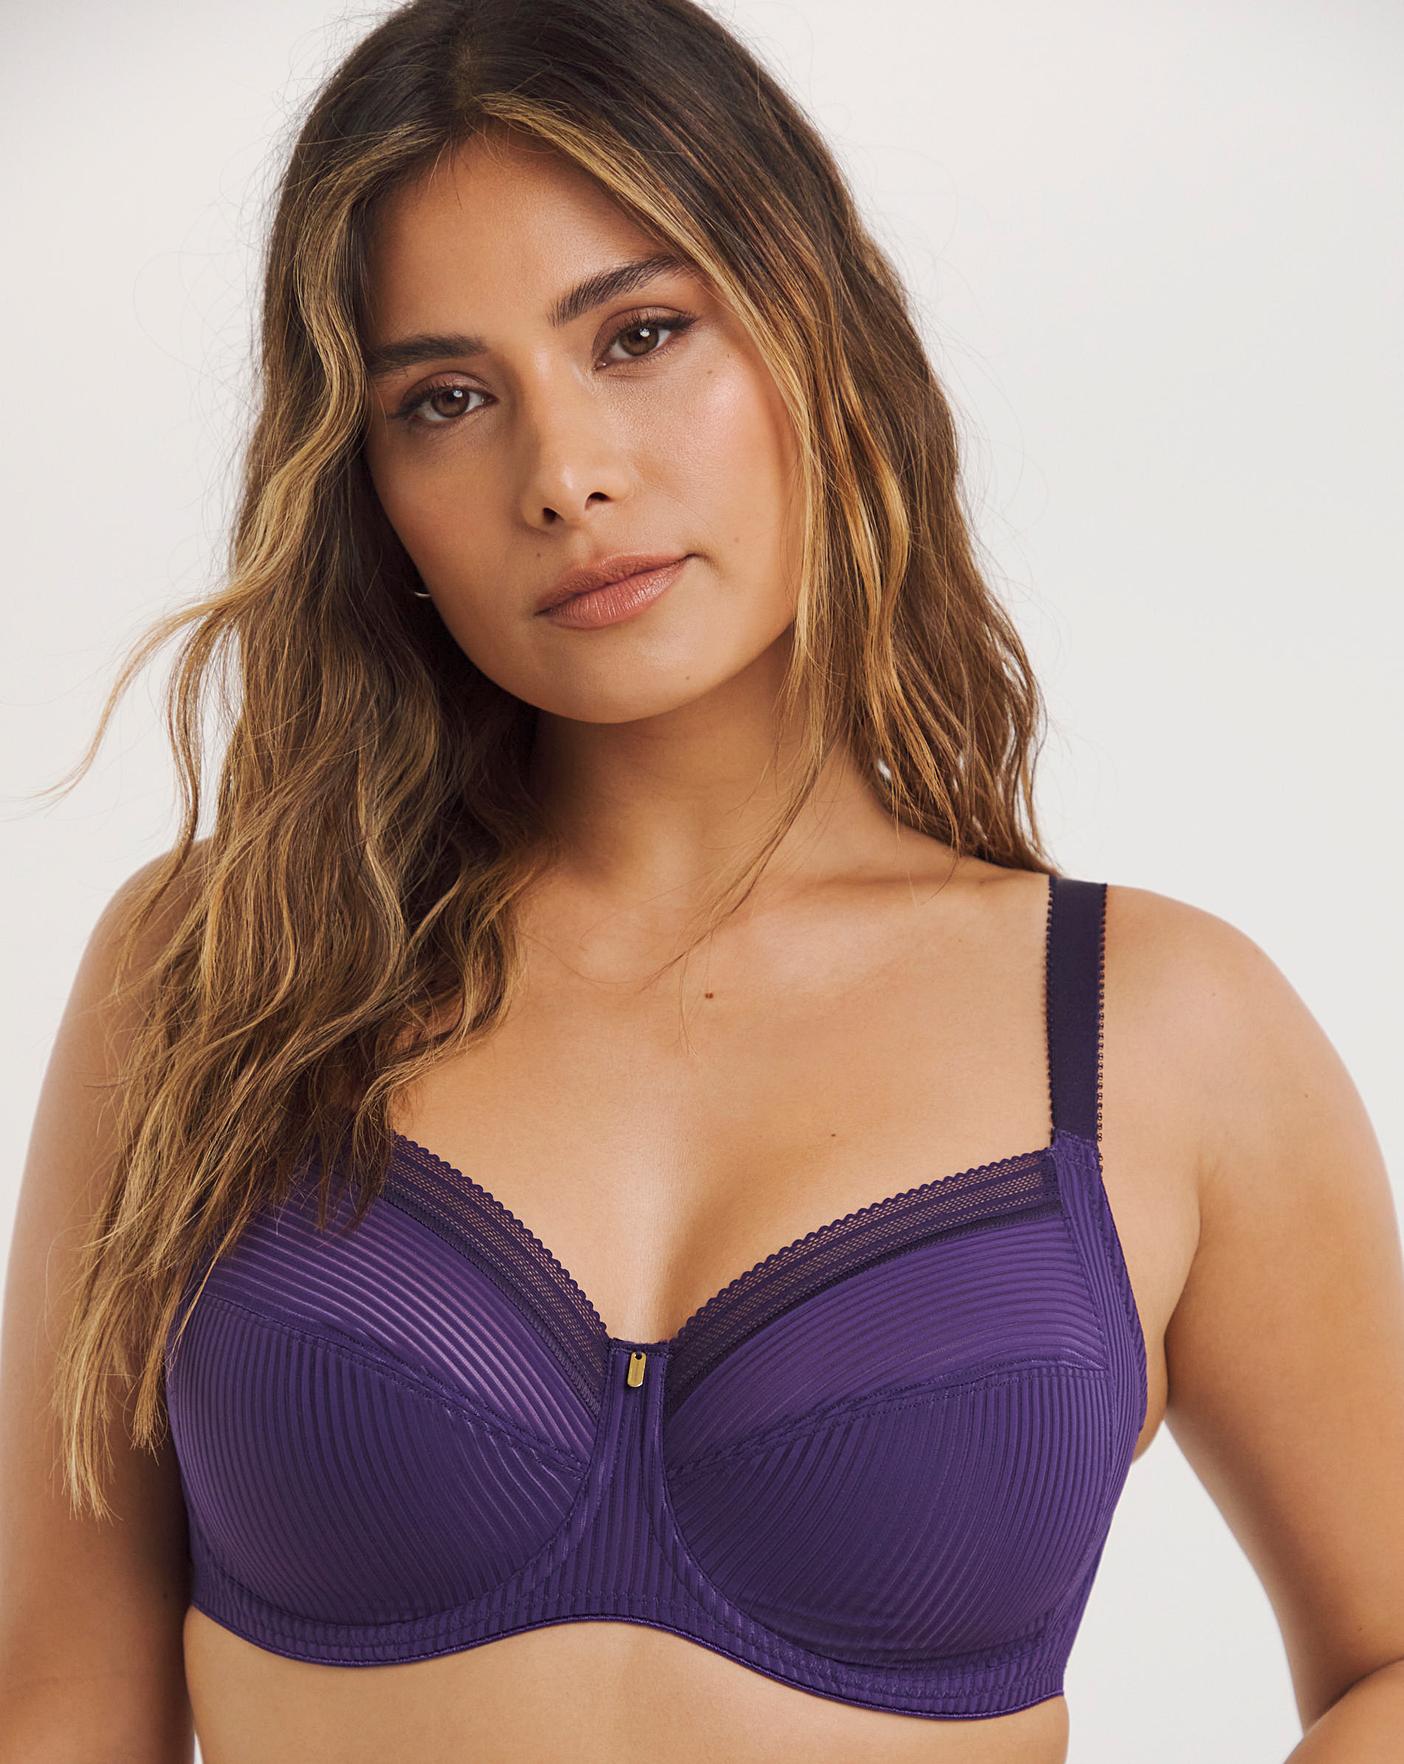 Buy the Fantasie Fusion Full cup Bra, Briefs, Uplifted Lingerie